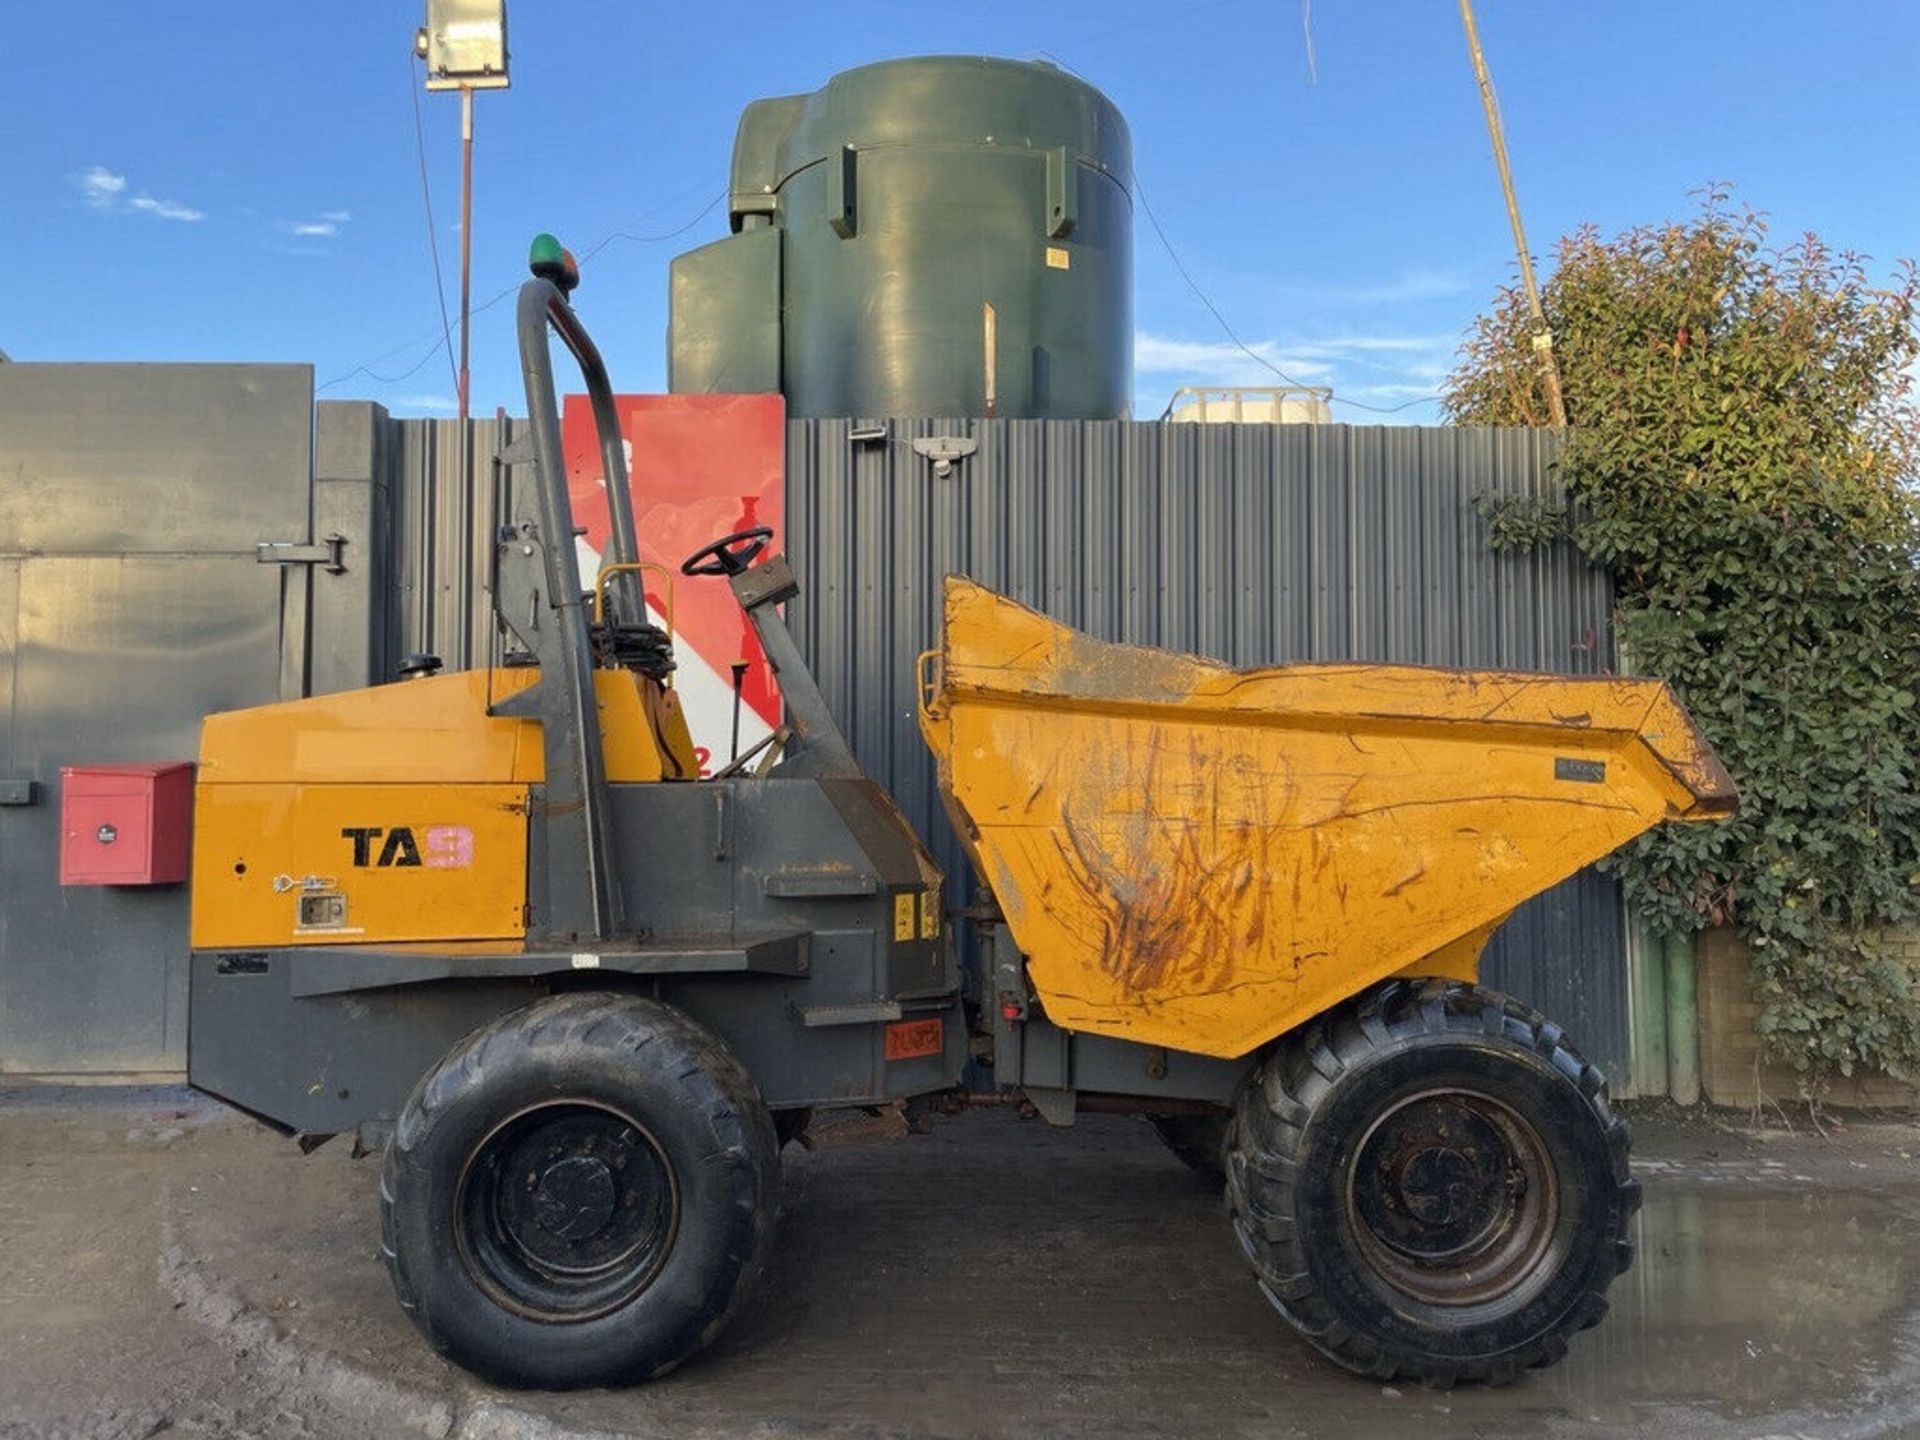 2014 TEREX TA9 DUMPER: POWER, PRECISION, AND PERFORMANCE - Image 10 of 11